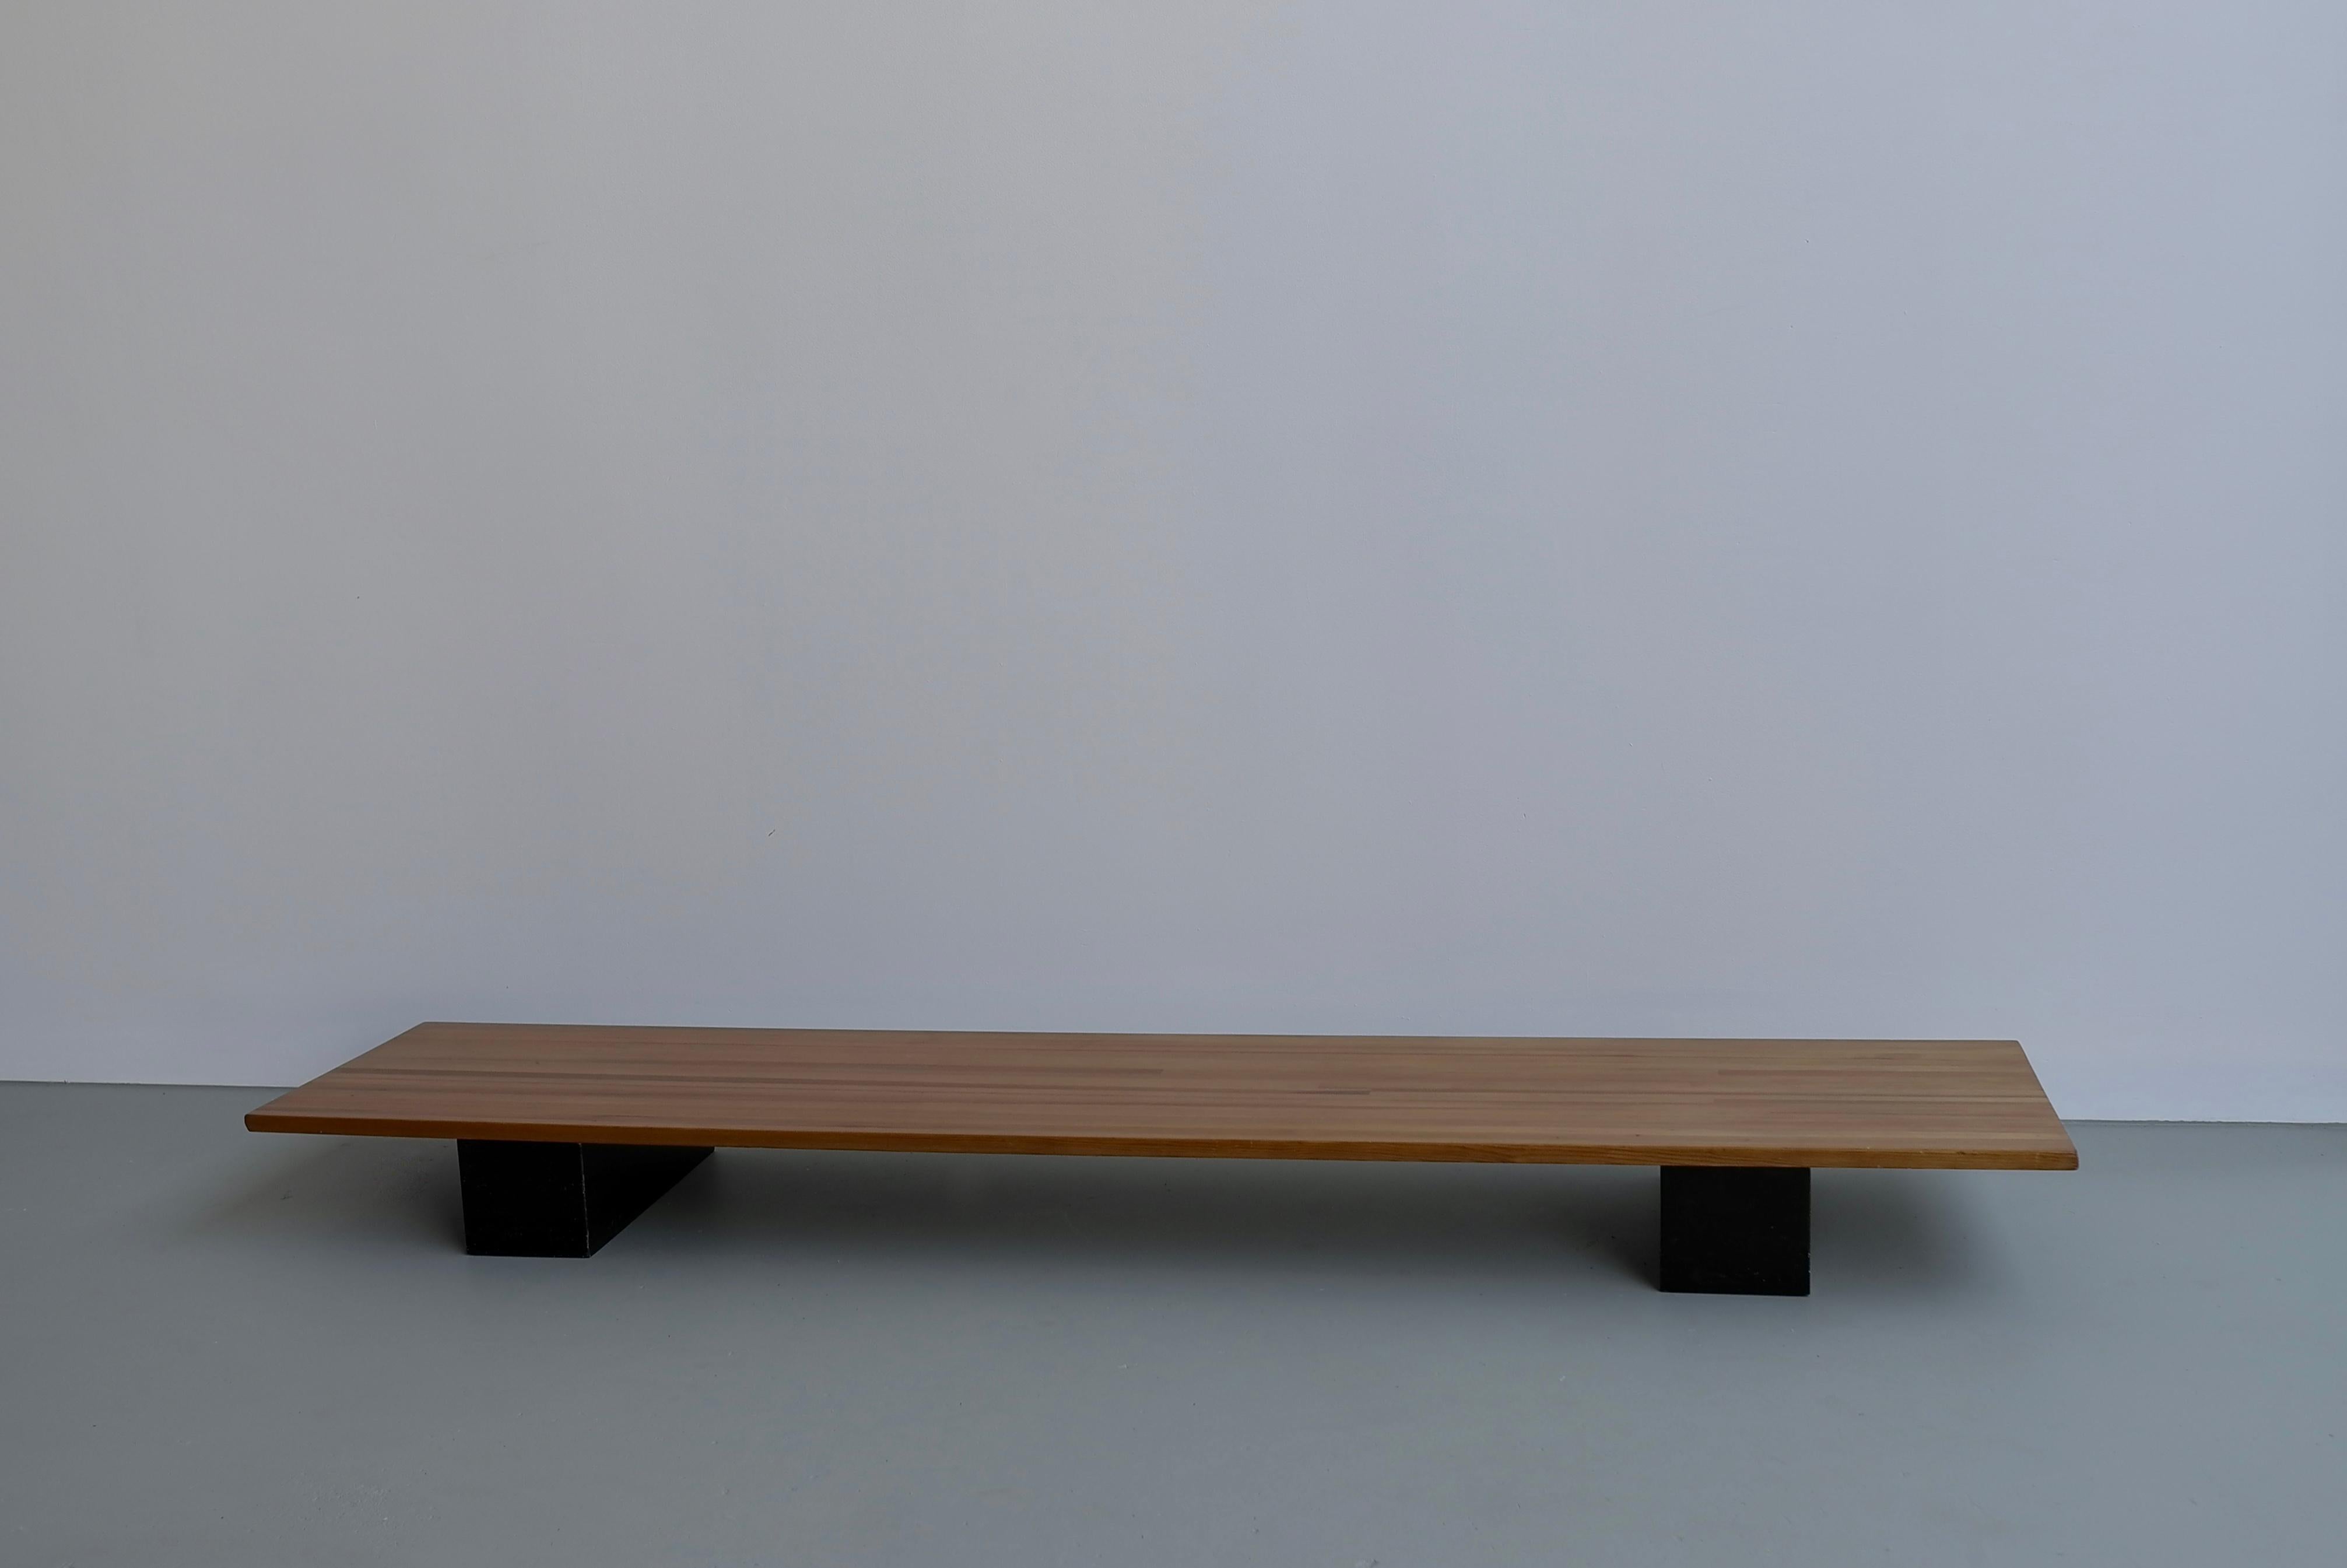 Large Low Pine Coffee Table by Ilmari Tapiovaara for Laukaan Pu, Finland, 1950s In Good Condition For Sale In Den Haag, NL